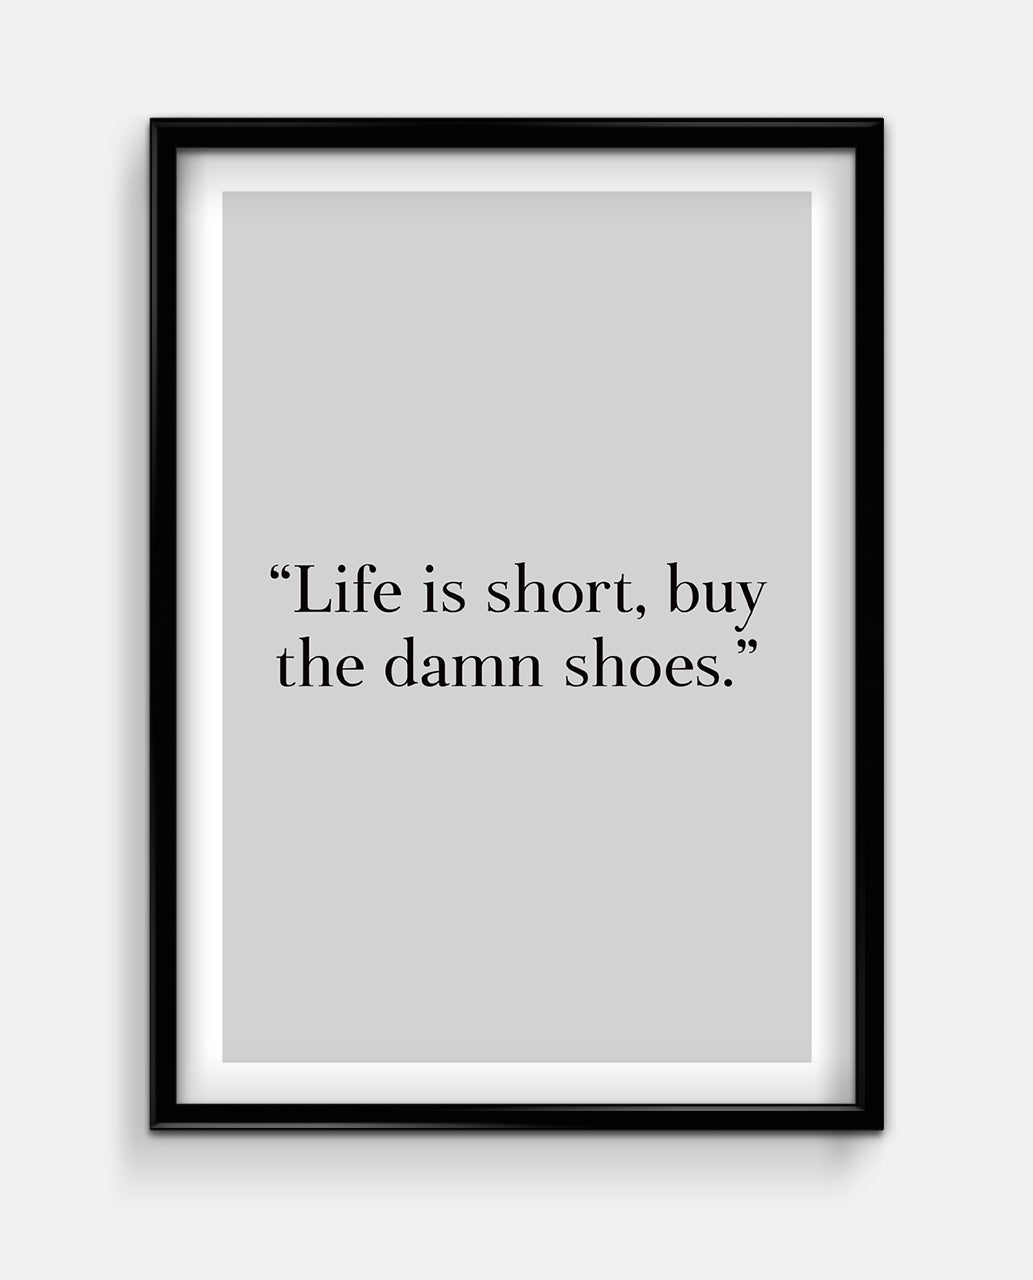 Life is short, buy the damn shoes